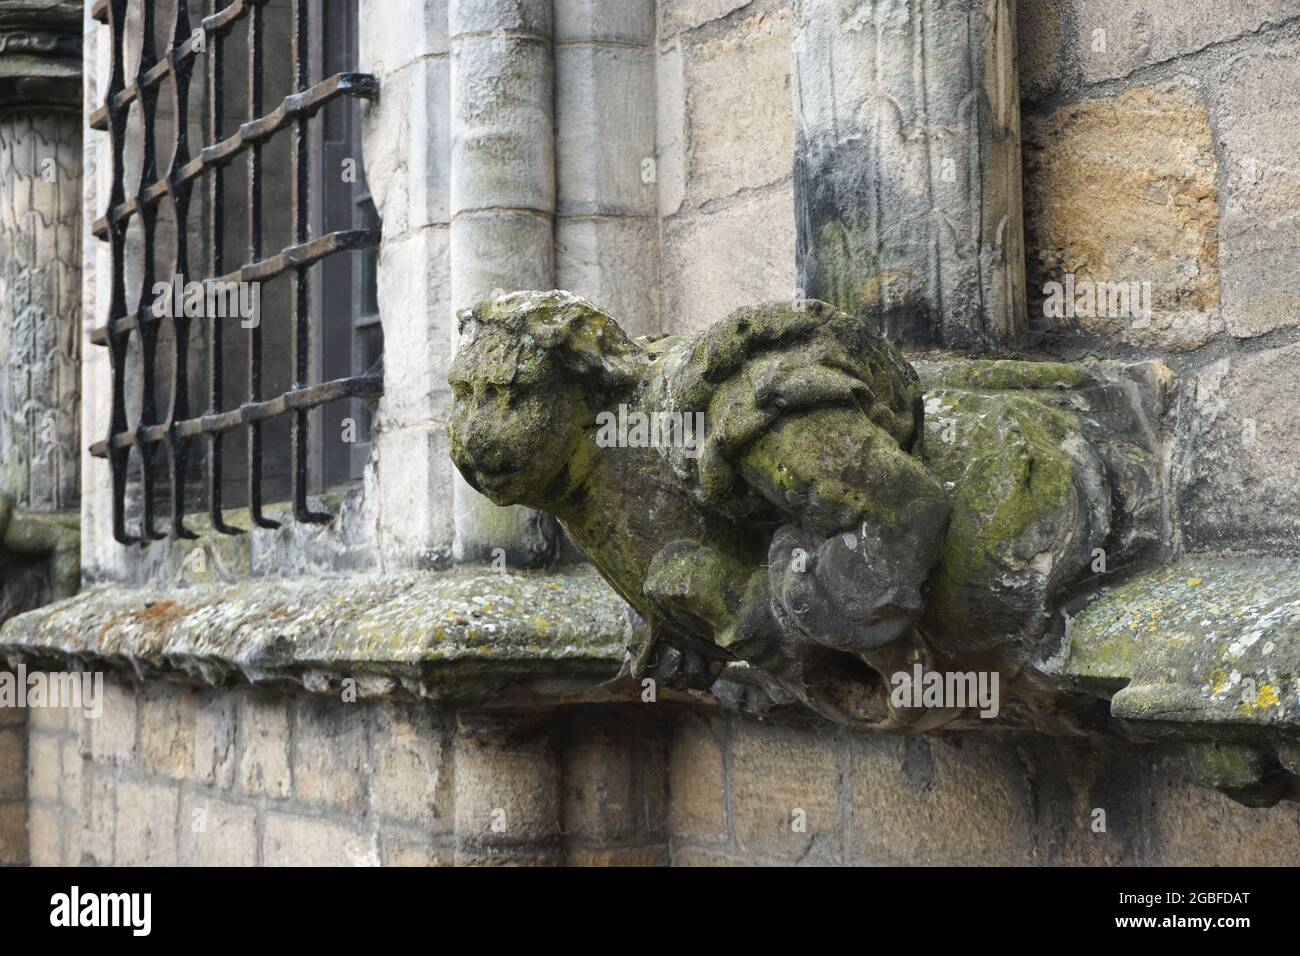 Eroded by centuries of acid rain, a carved stone gargoyle watches from its perch on the south wall of the Palace at Stirling Castle, Scotland. Stock Photo